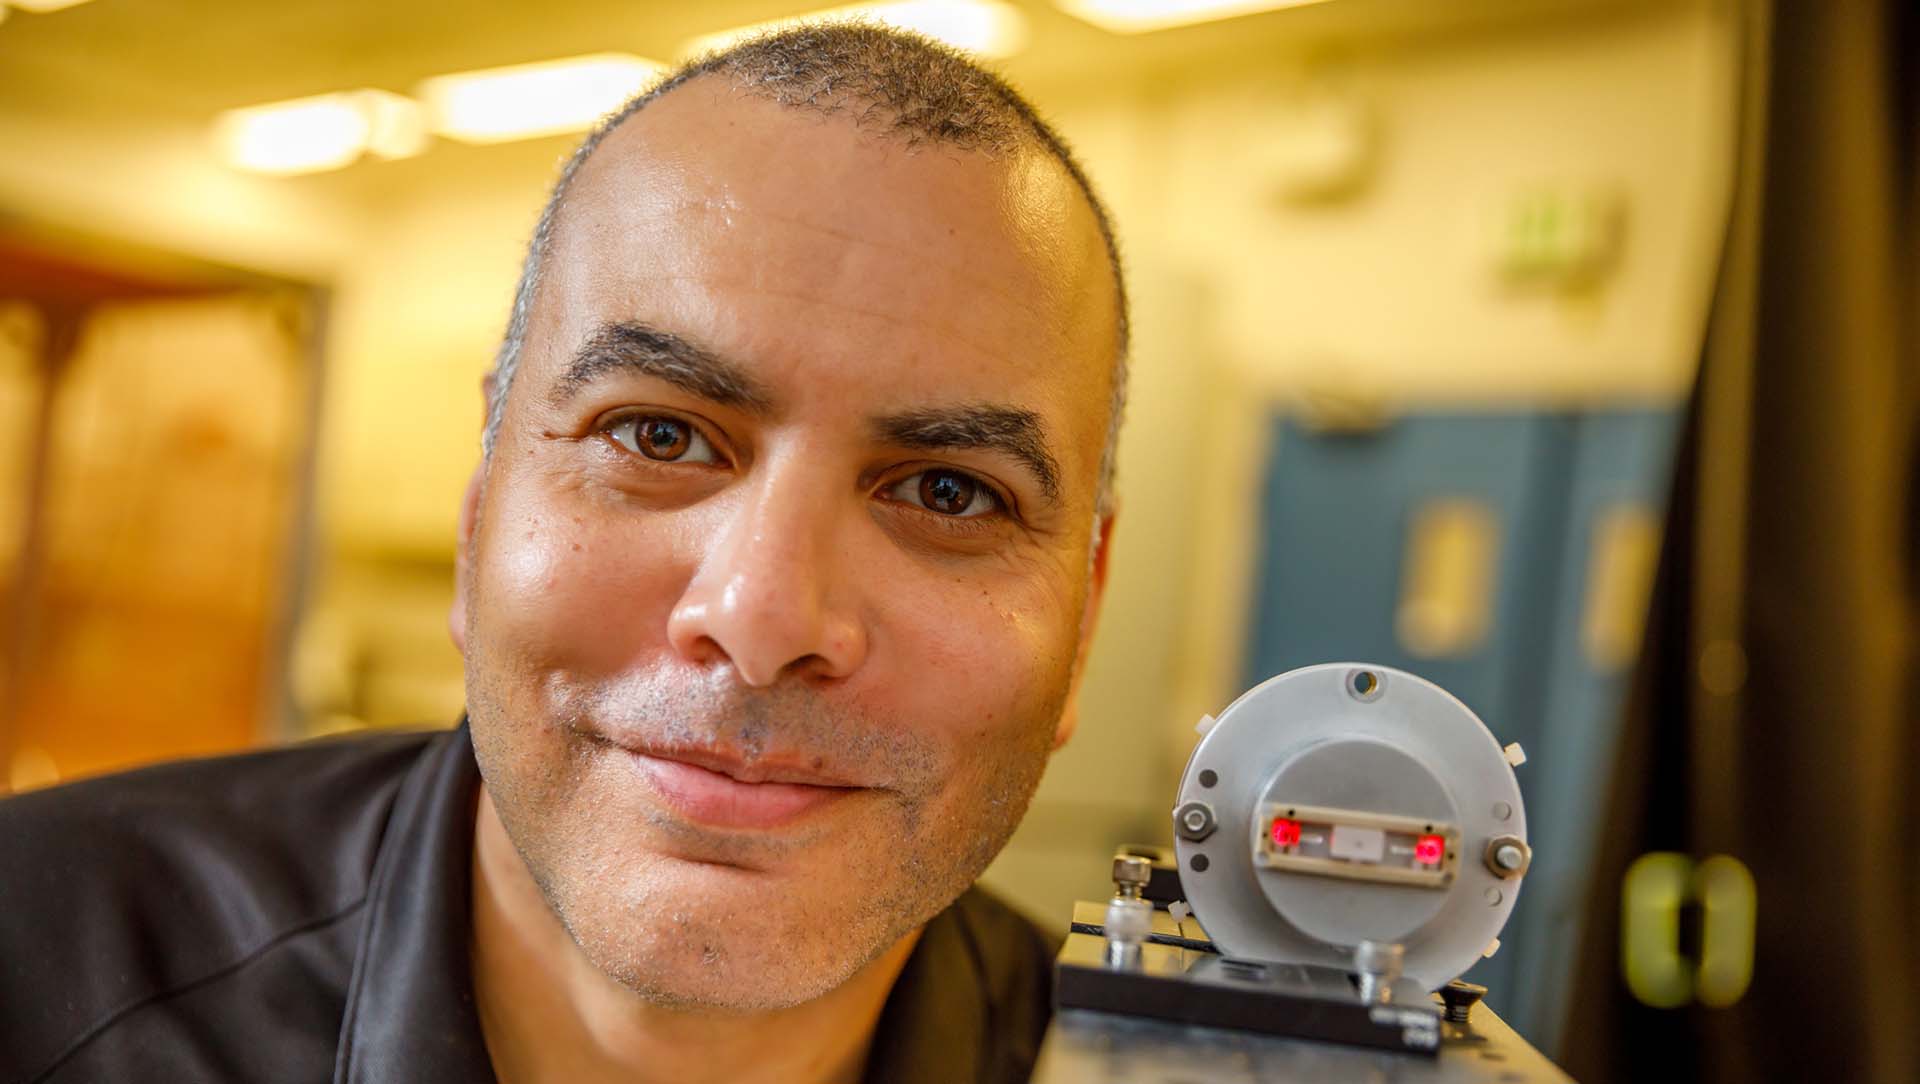 A Sandia researcher holds an optical sensor to measure high voltages.